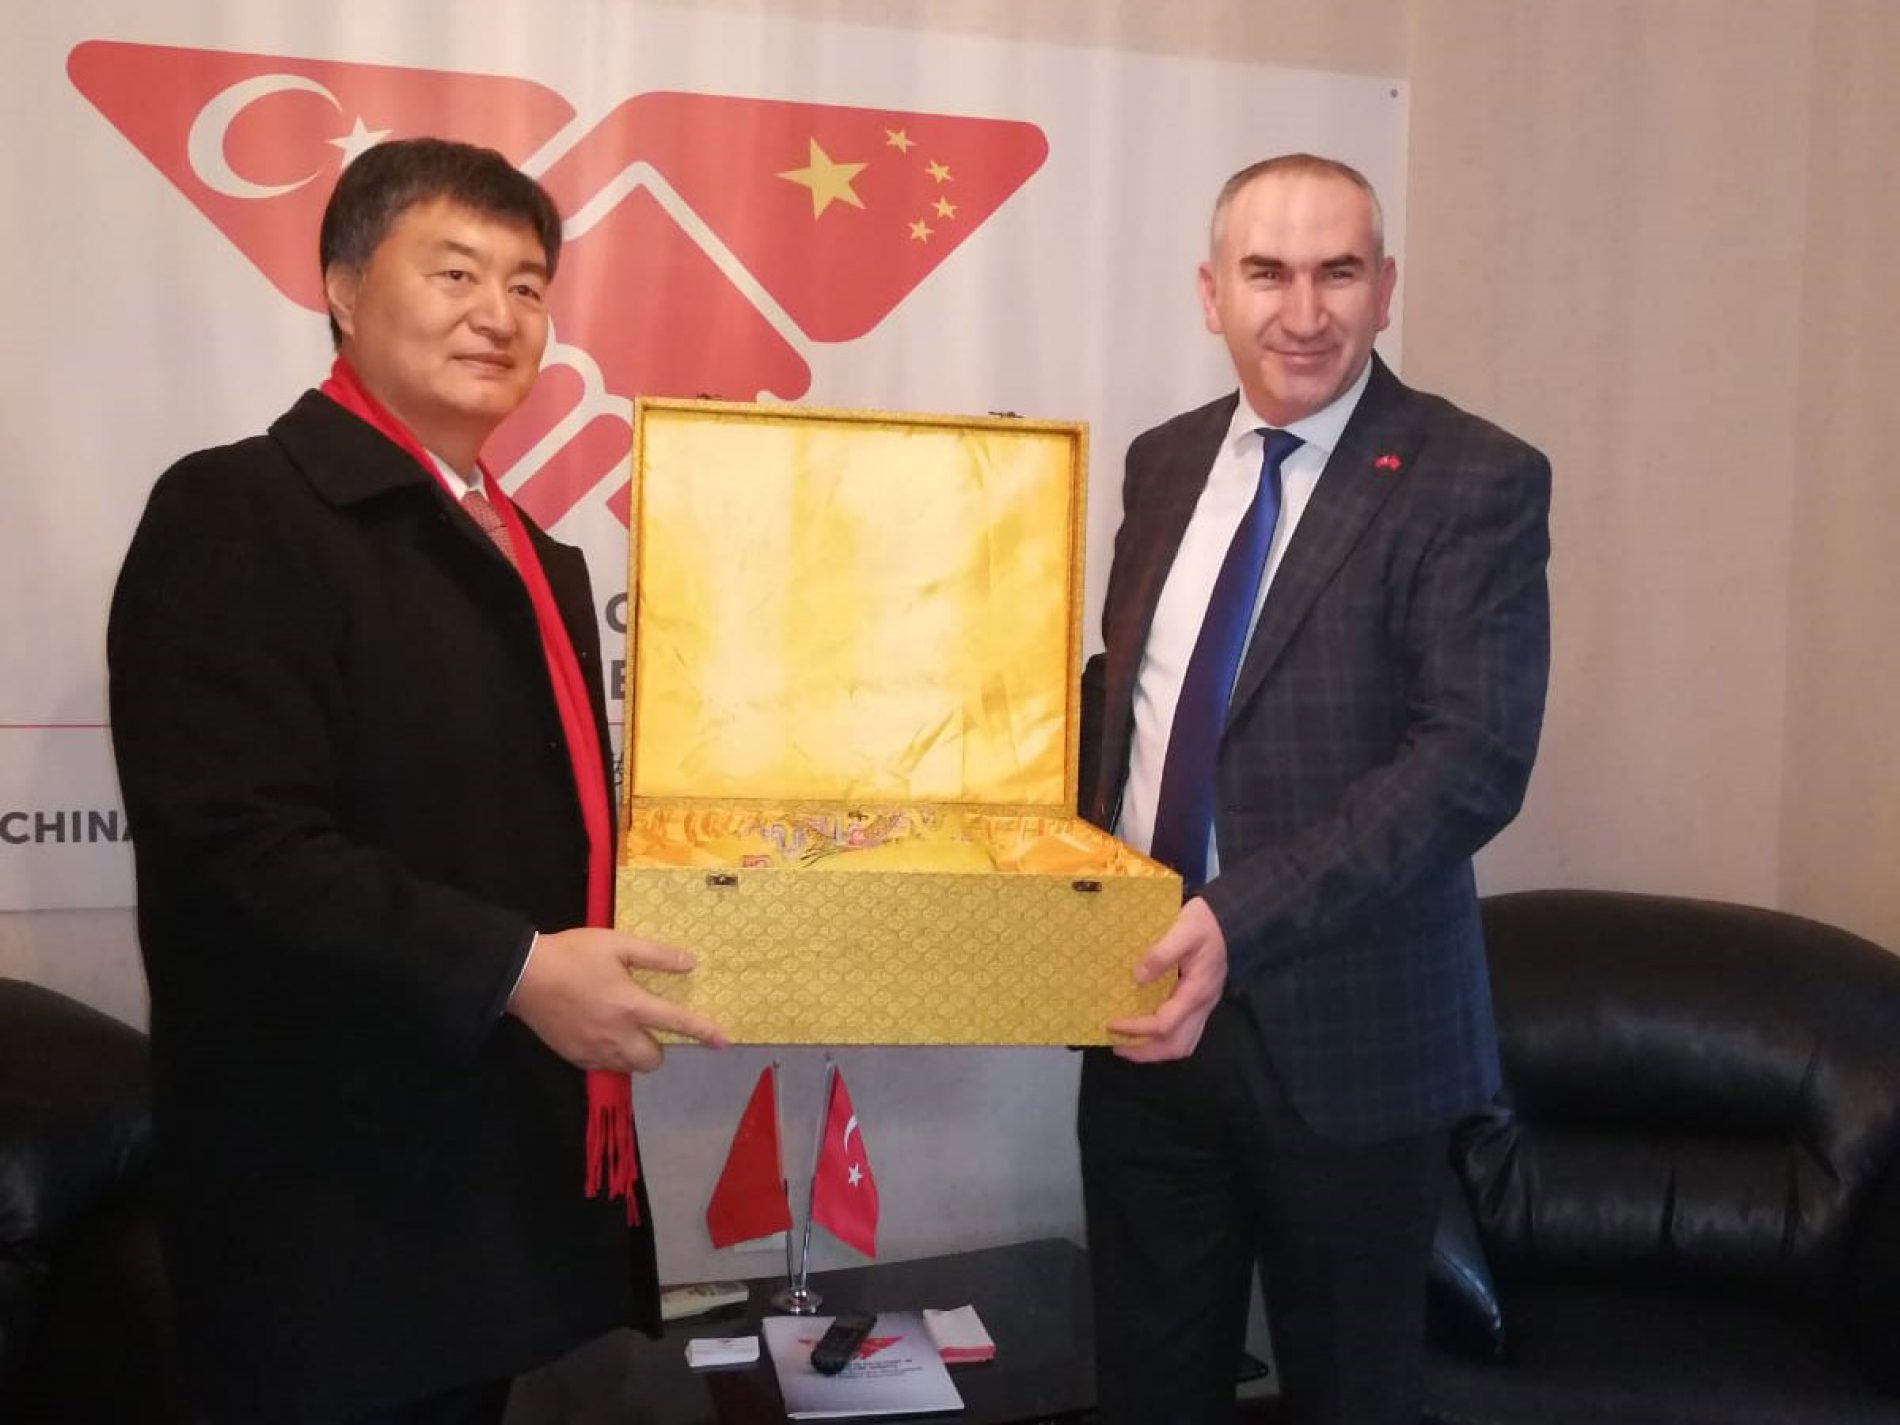 The Undersecretary of Economy and Trade of the People’s Republic of China, Dr. Lıu YUHUA visited Mr. İhsan Beşer, Board Chairman